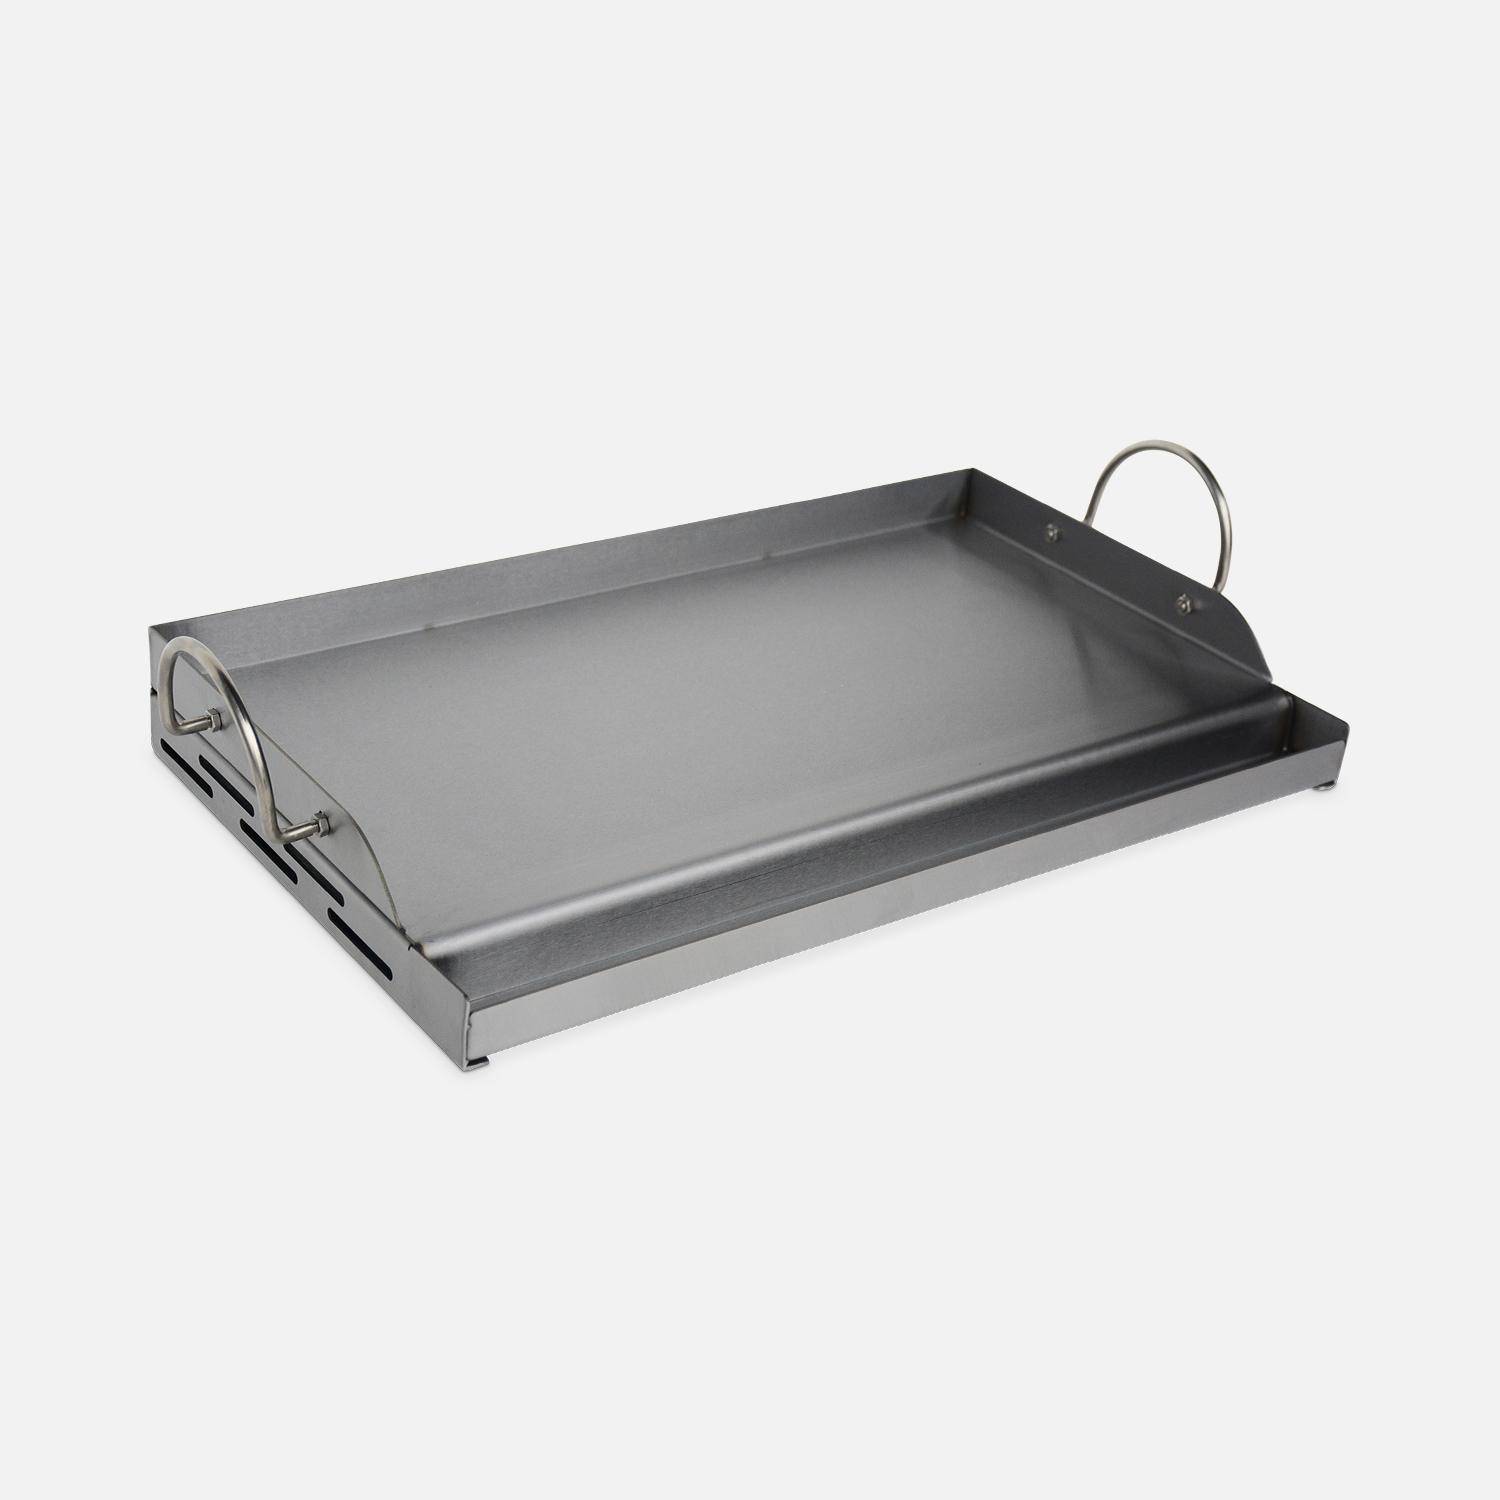 55cm Universal griddle for barbecue Photo3